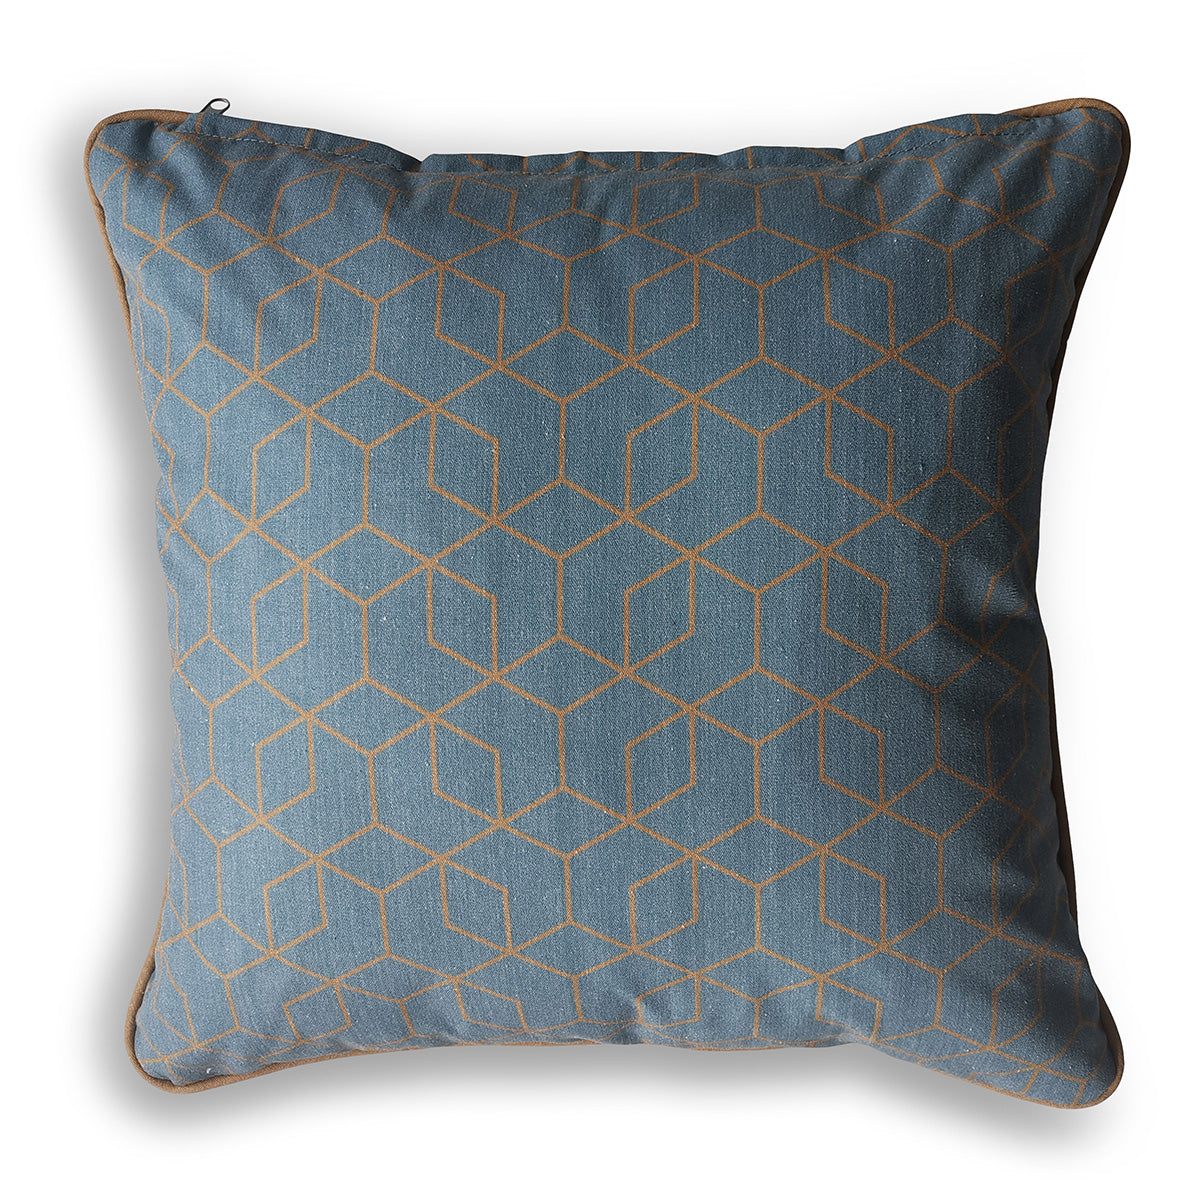 LG | Deluxe Blue & Gold Cube Scatter Cushion - 50cm